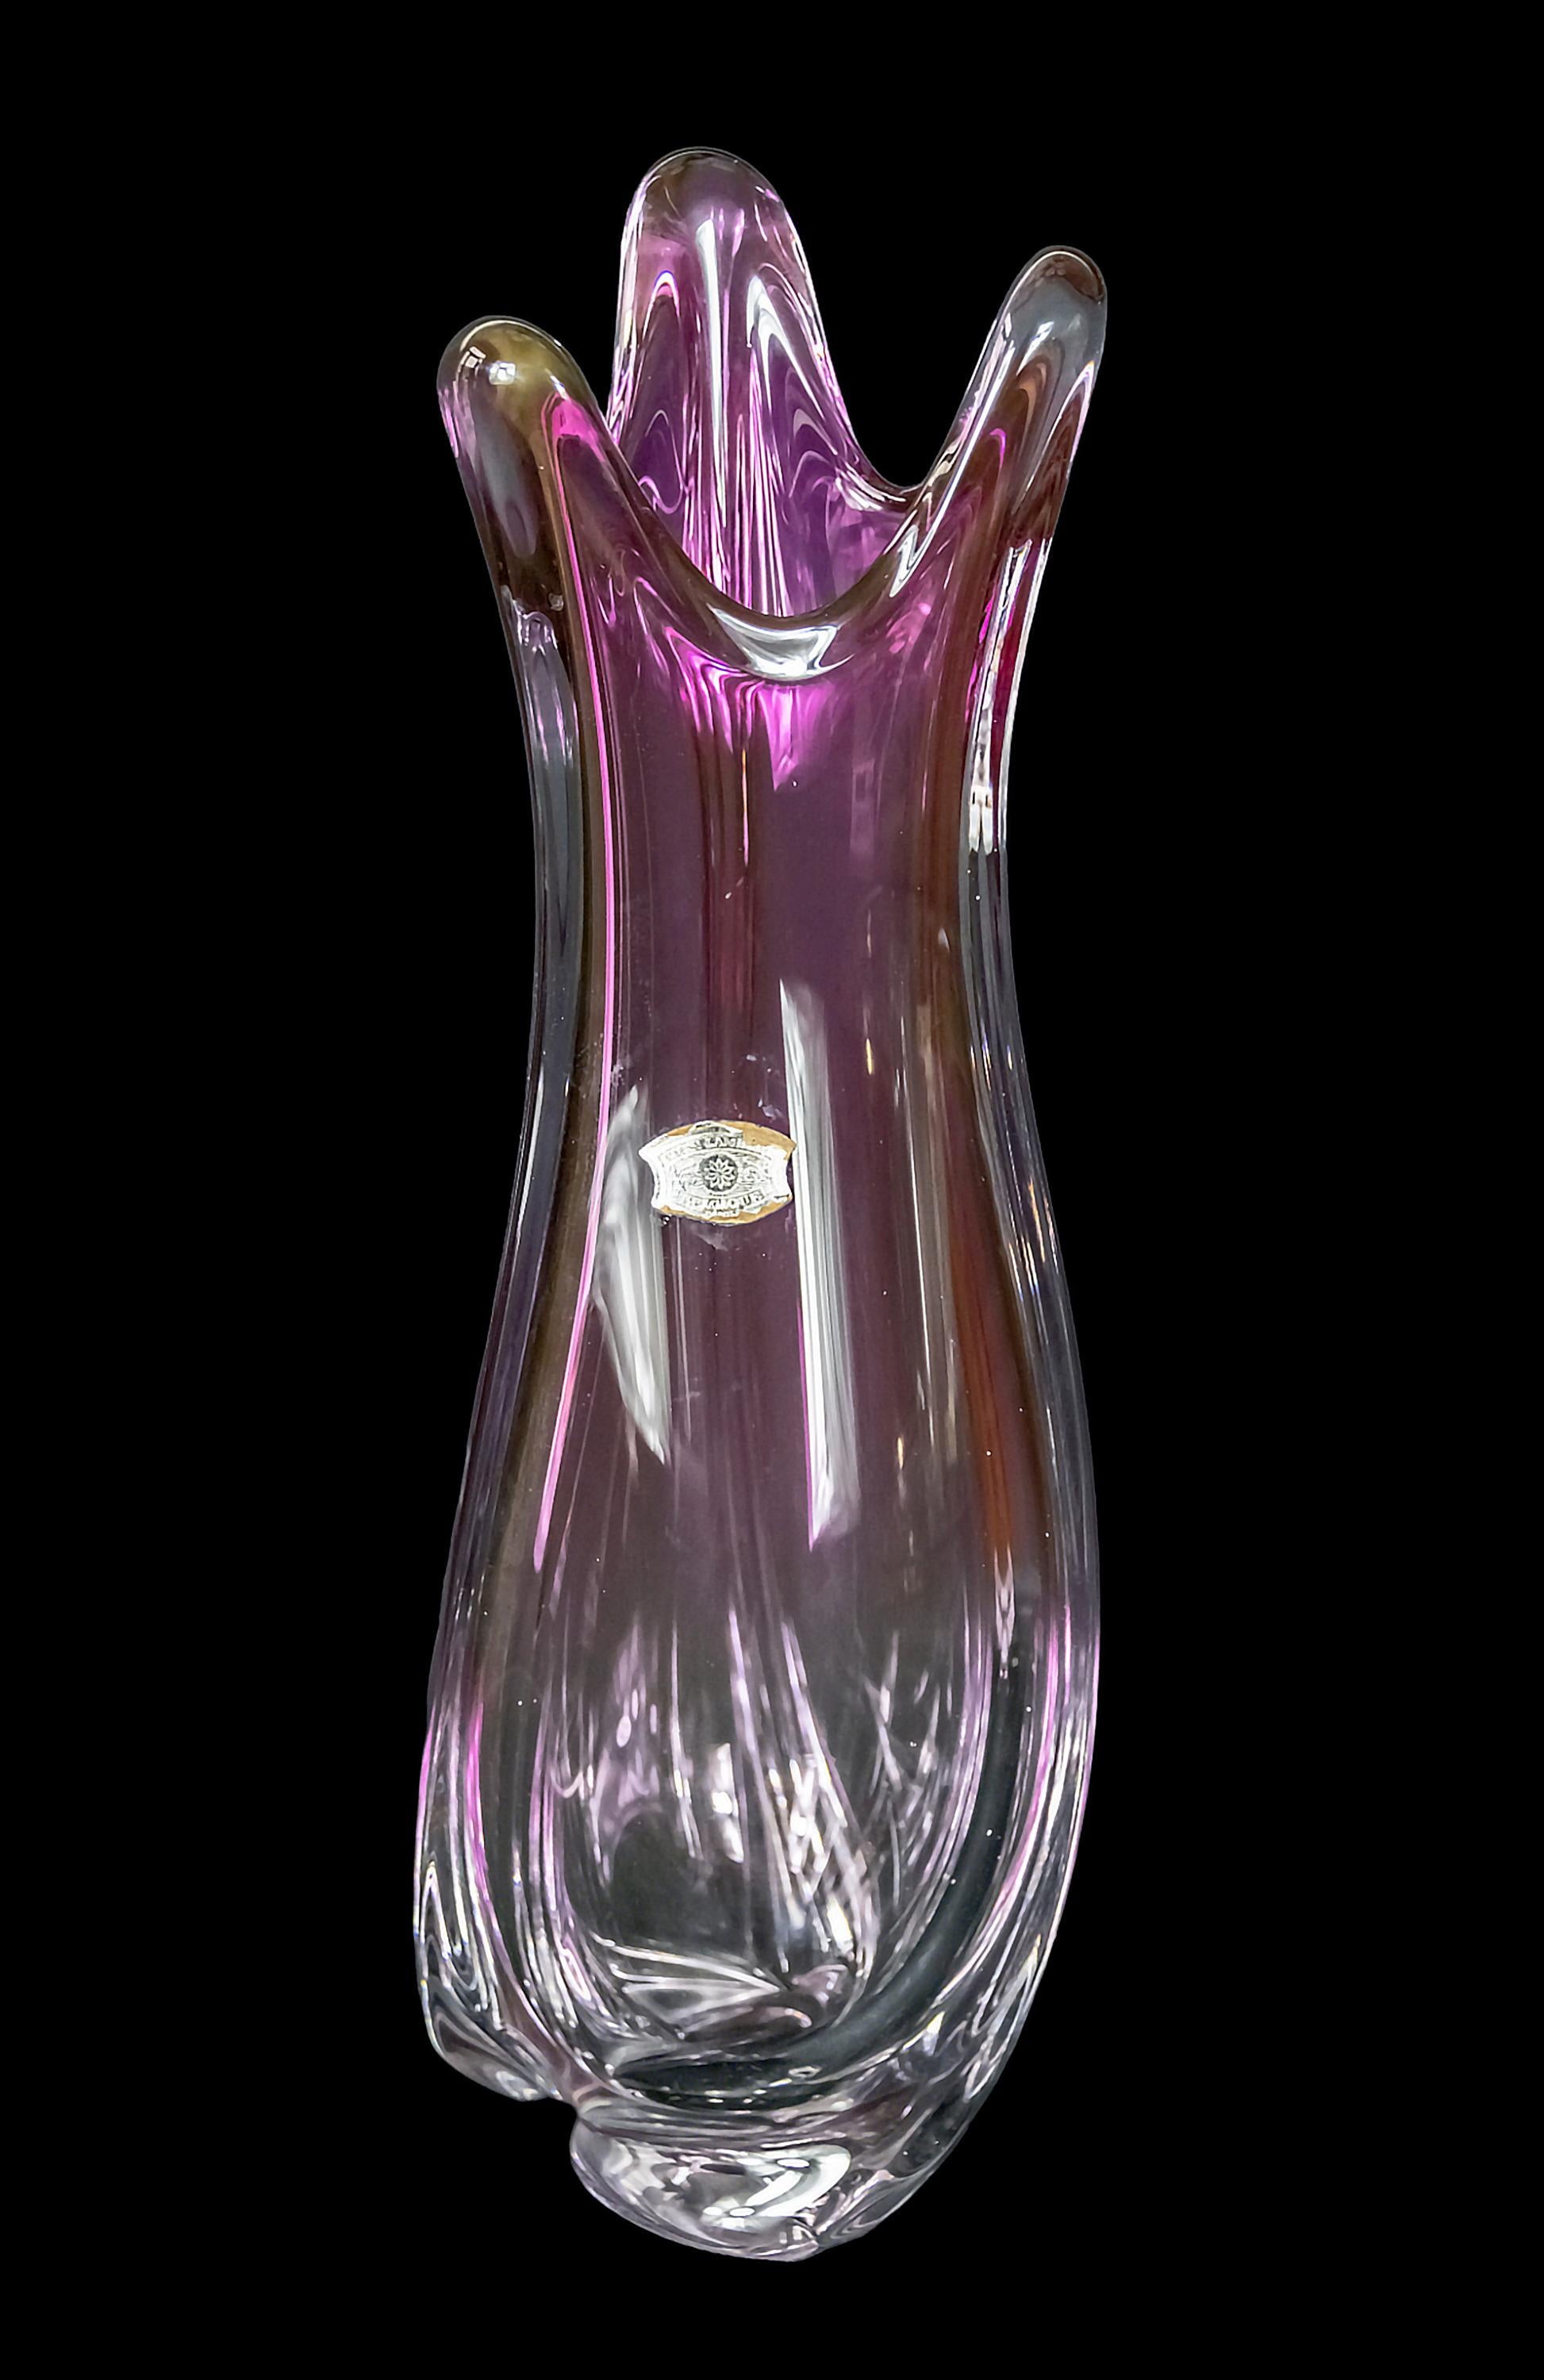 Large and heavy handmade Val Saint Lambert crystal vase created in asymmetric twisting shape and clear to fuchsia pink colour.
The vase is heavy and solid.
Labeled.